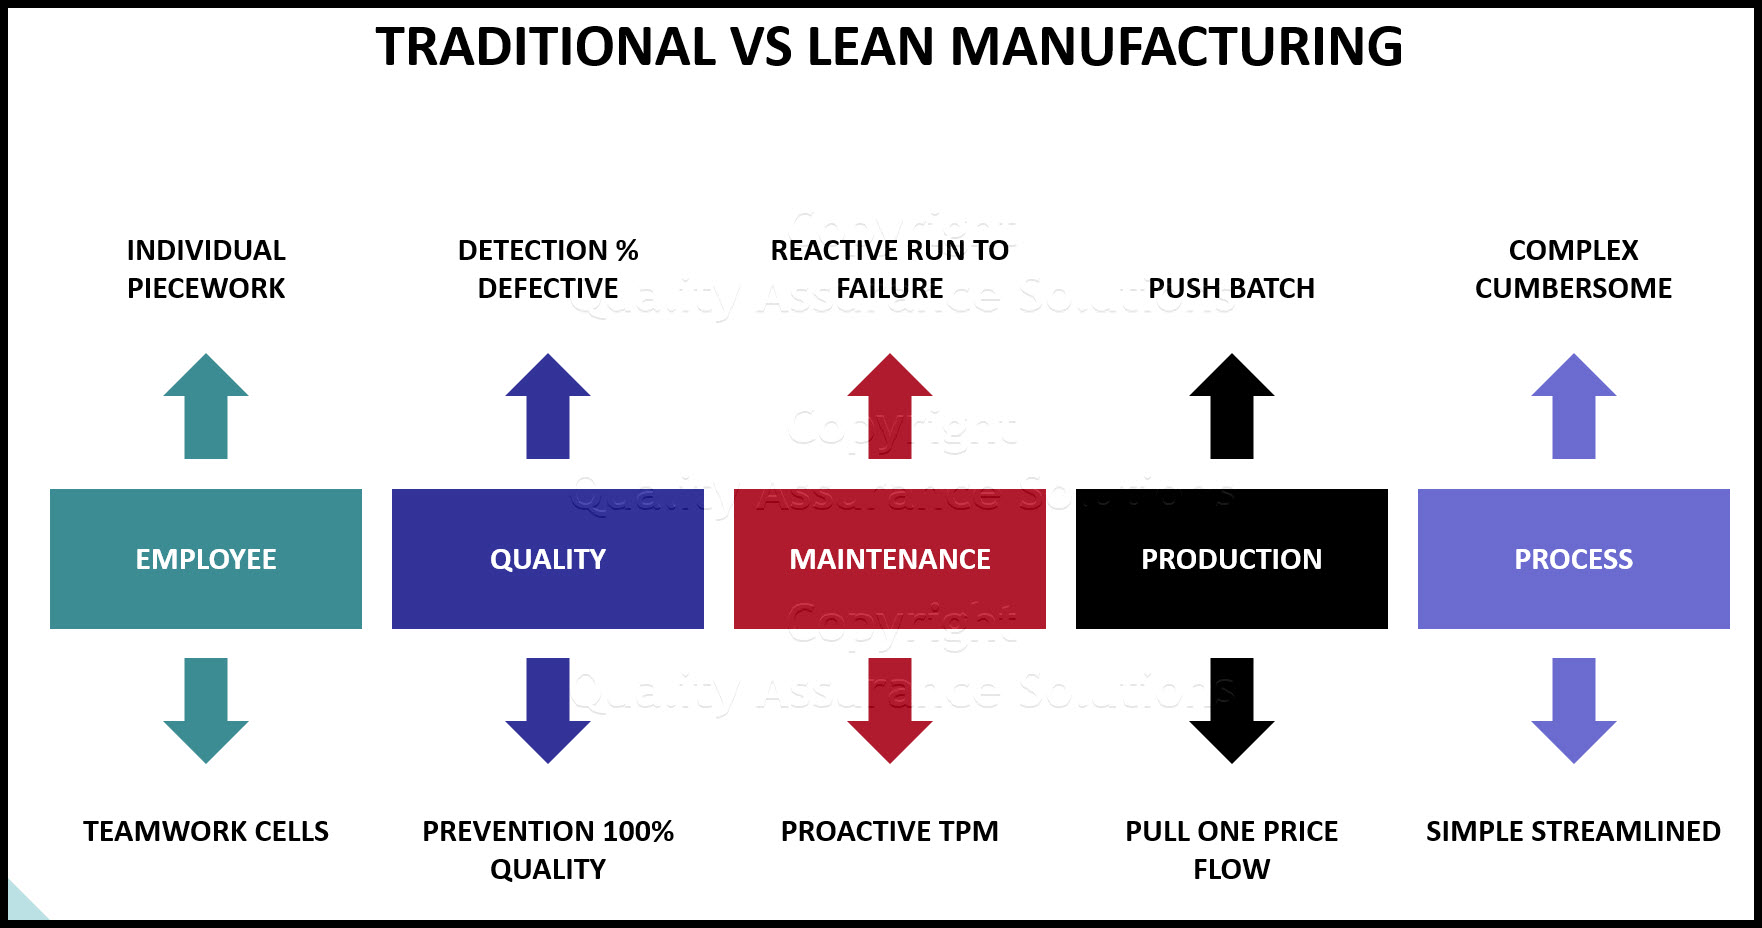 the goal of lean manufacturing is to